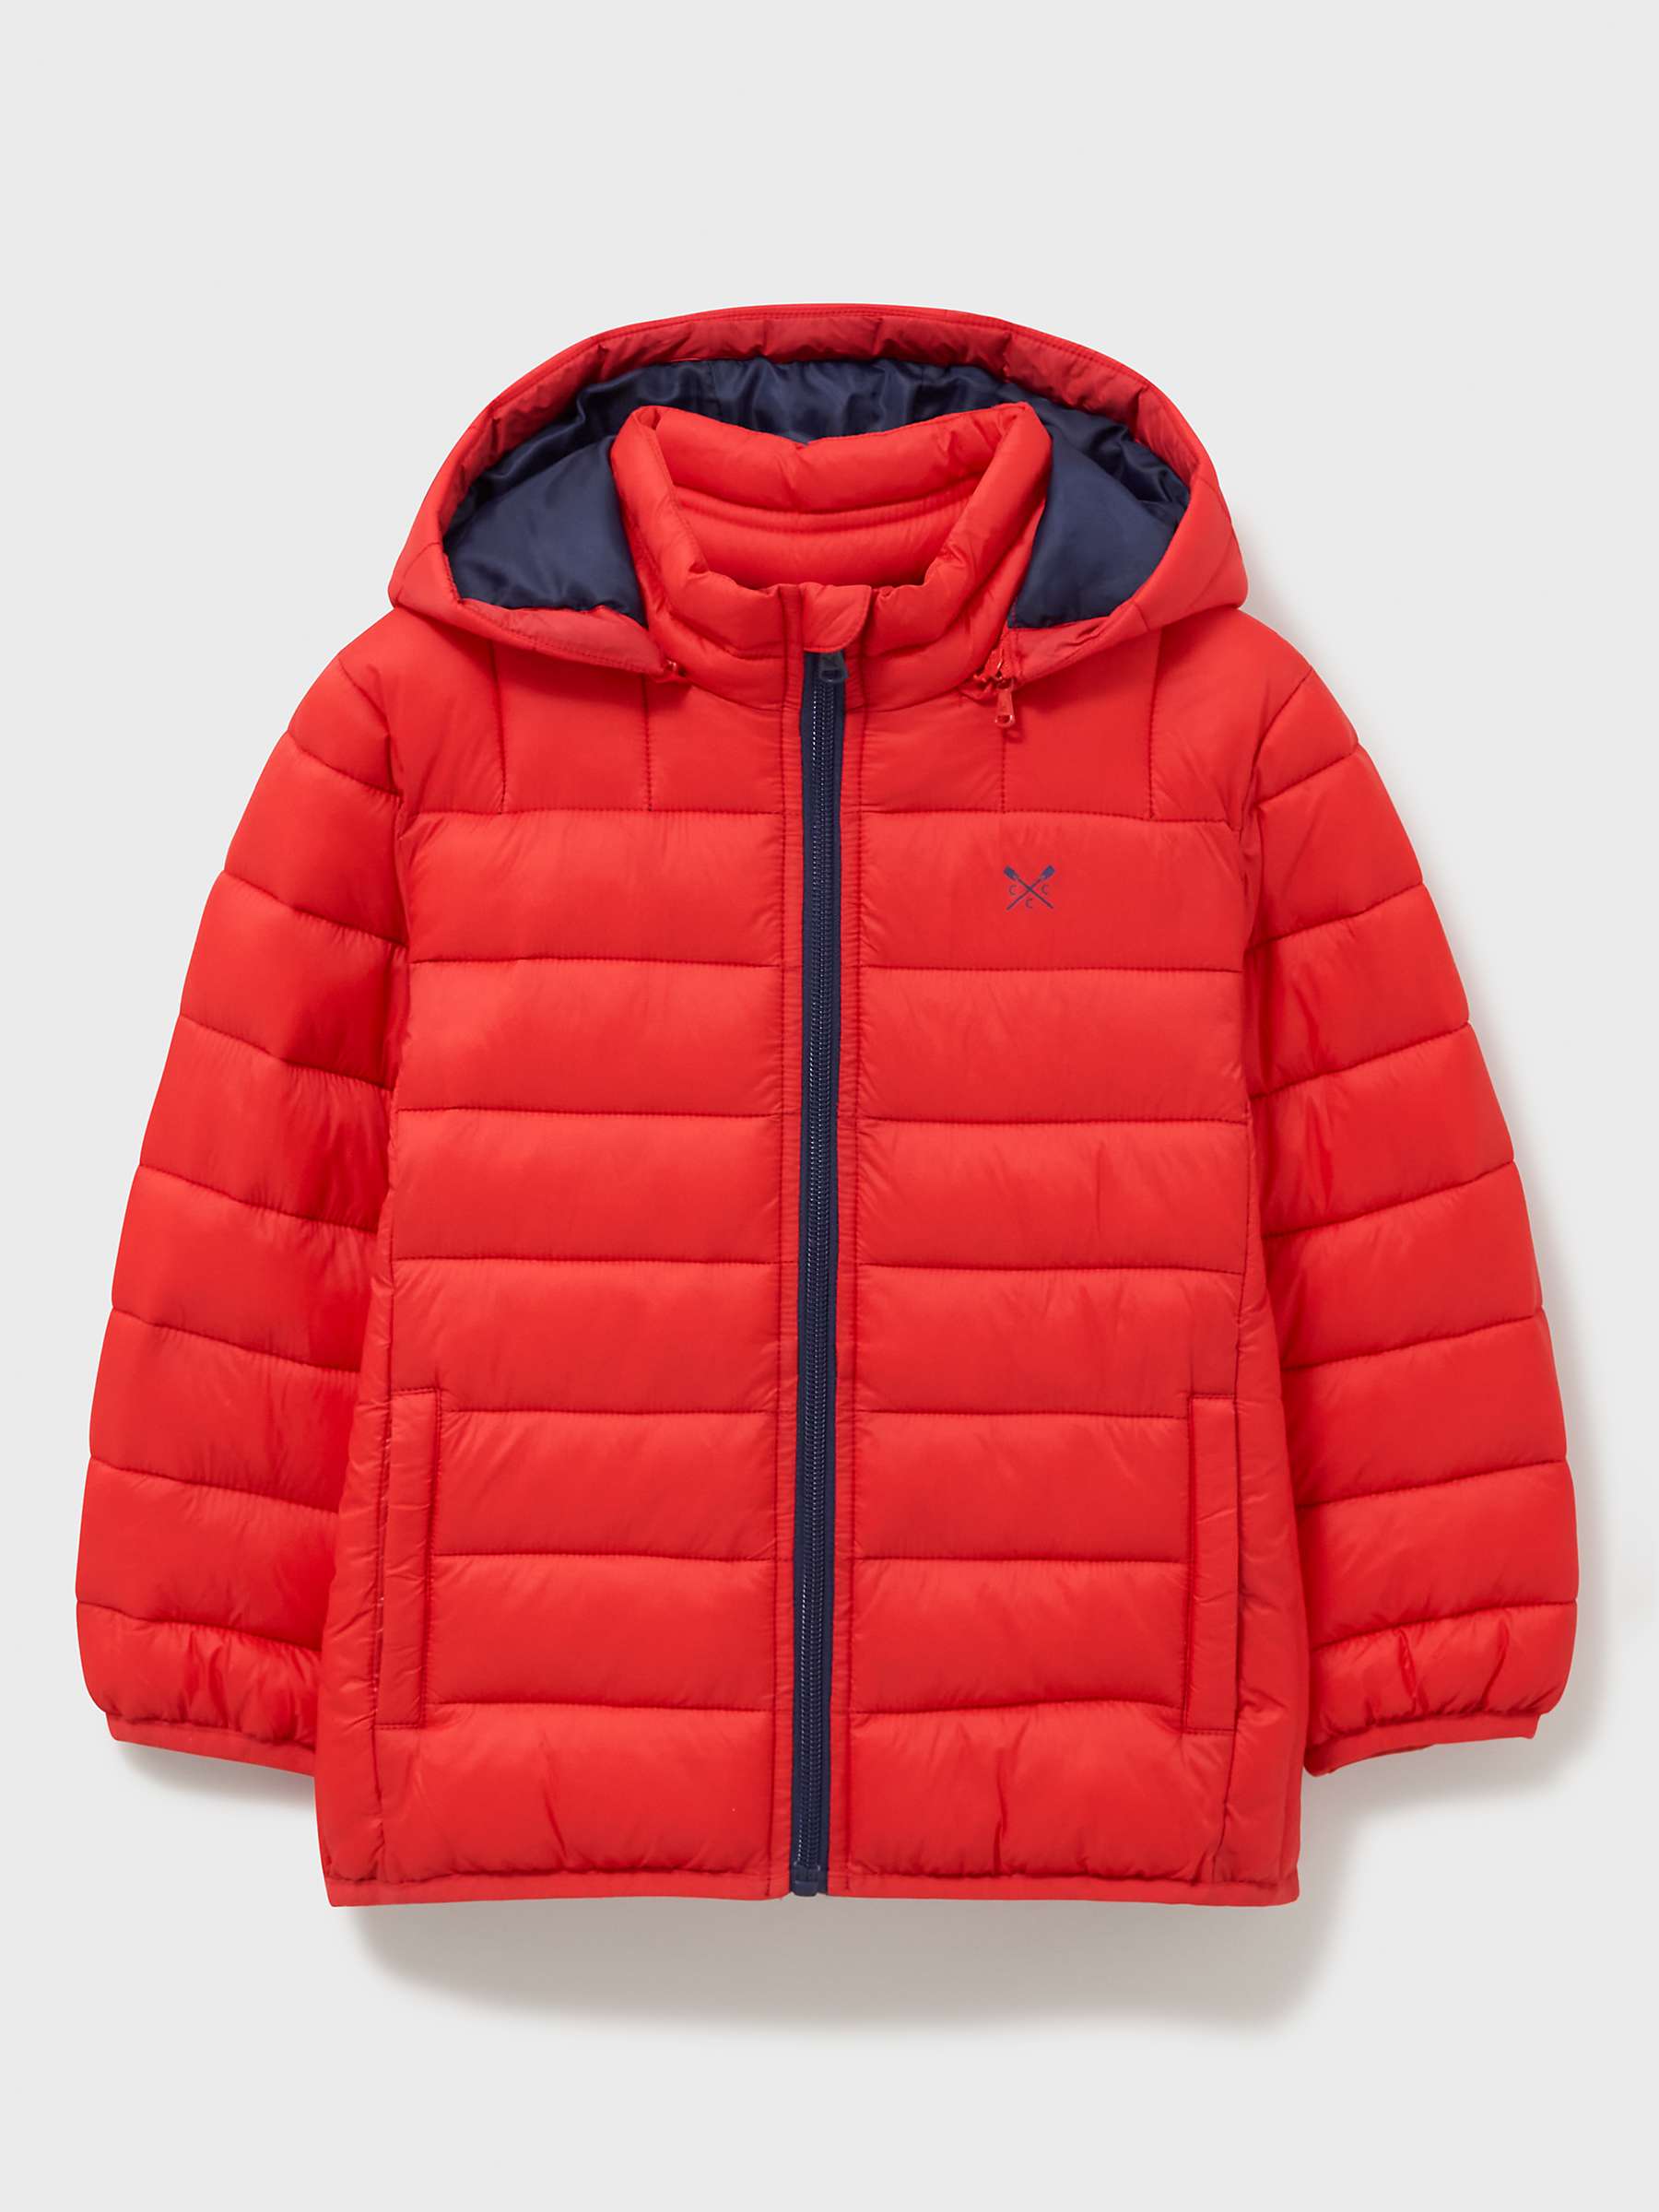 Crew Clothing Kids' Plain Quilted Jacket, Red at John Lewis & Partners